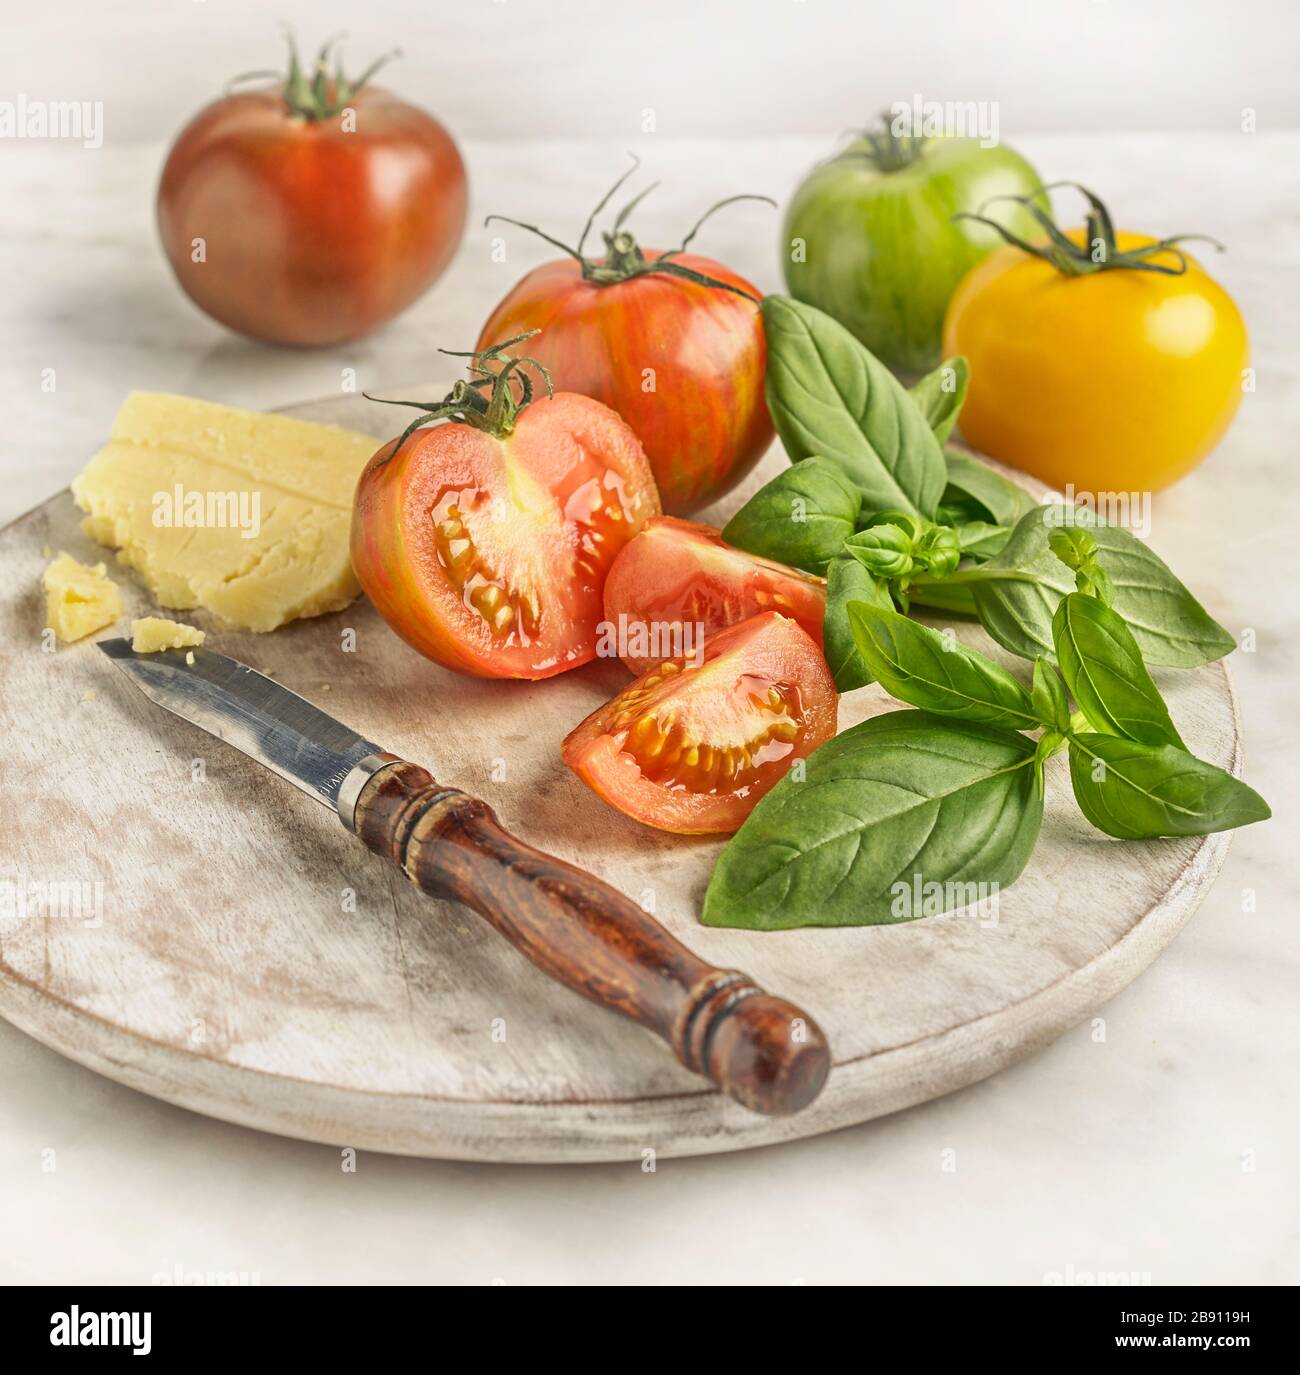 Chopping board with tomatoes, cheddar cheese and basil Stock Photo